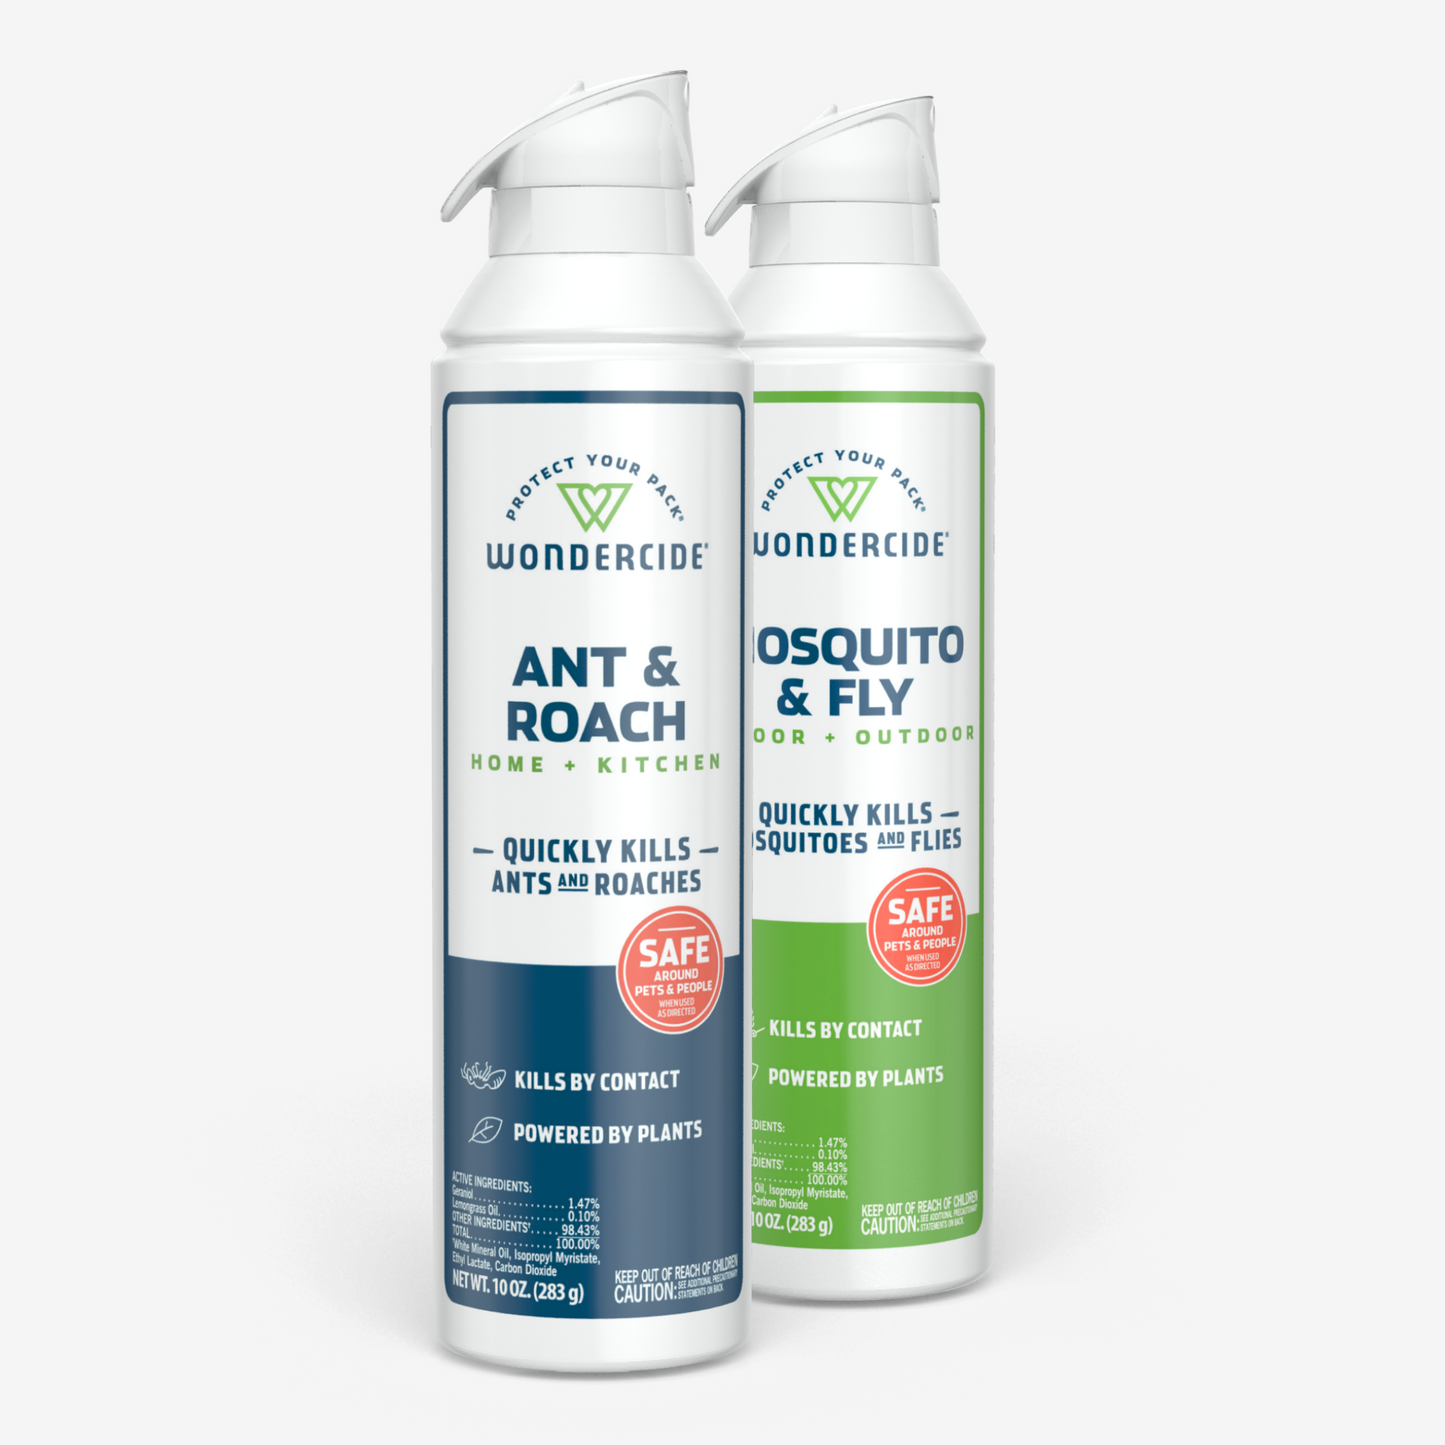 Ant & Roach + Mosquito & Fly Bundle